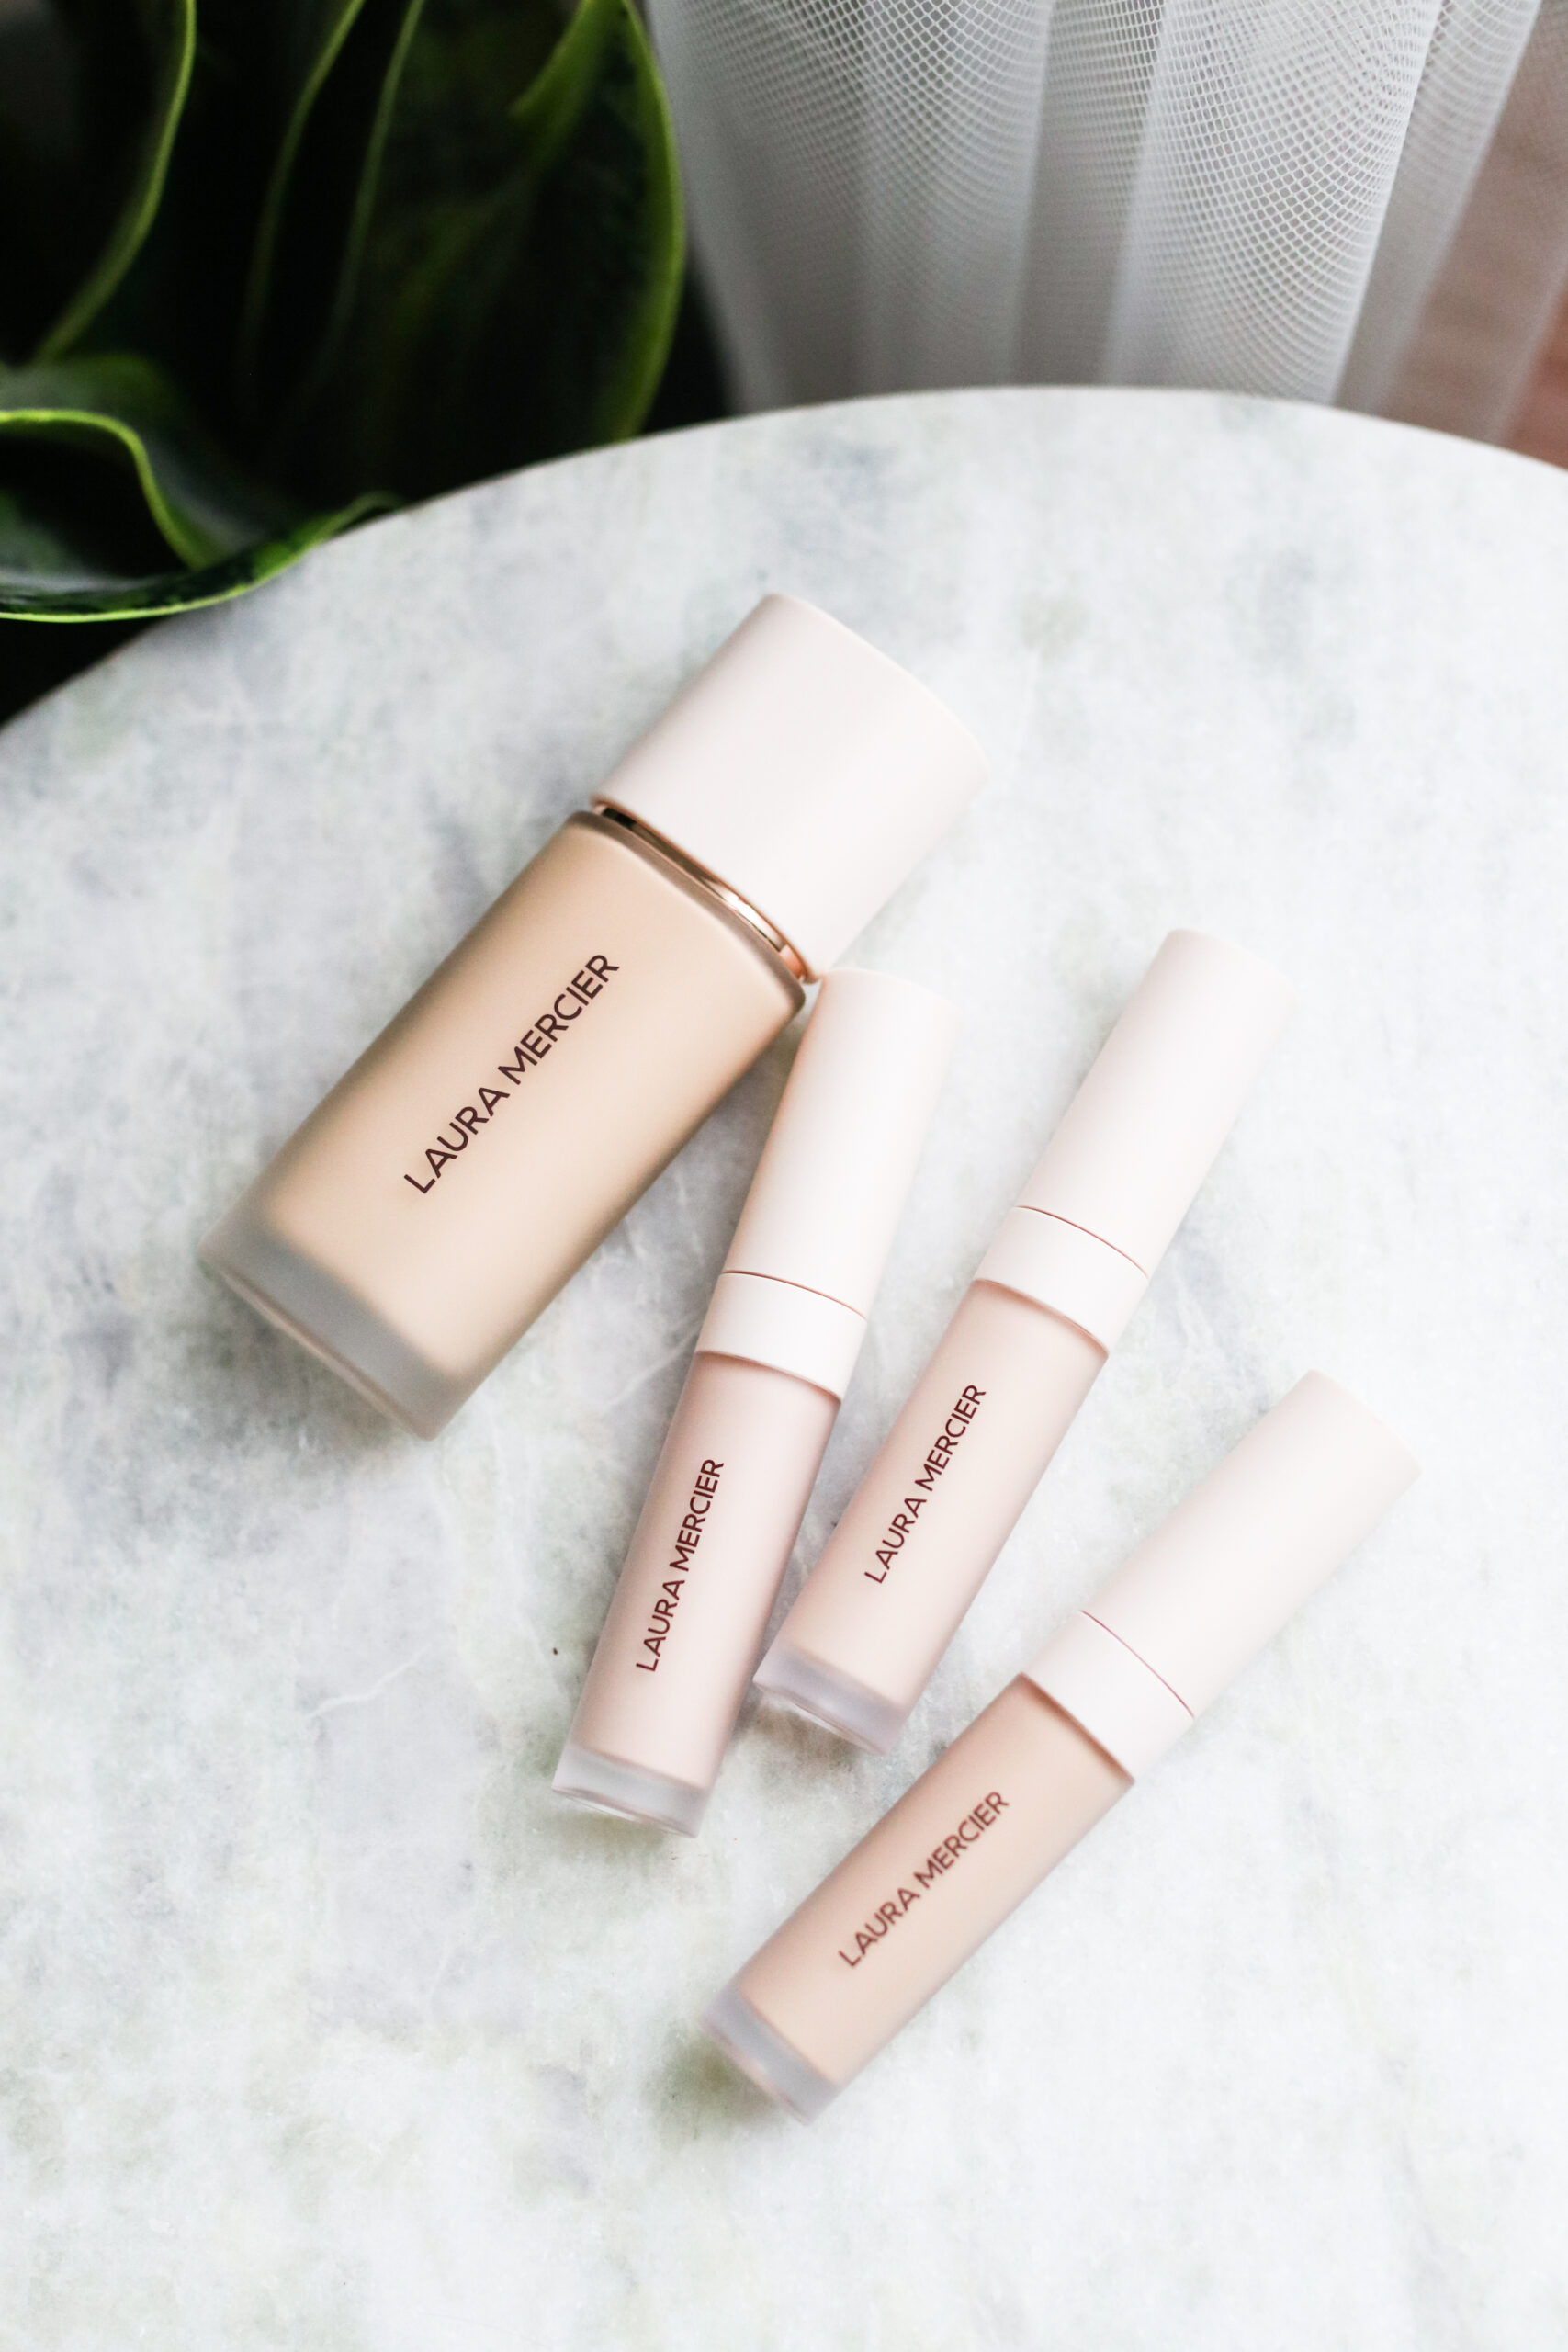 Laura Mercier Real Flawless Foundation & Concealer Review